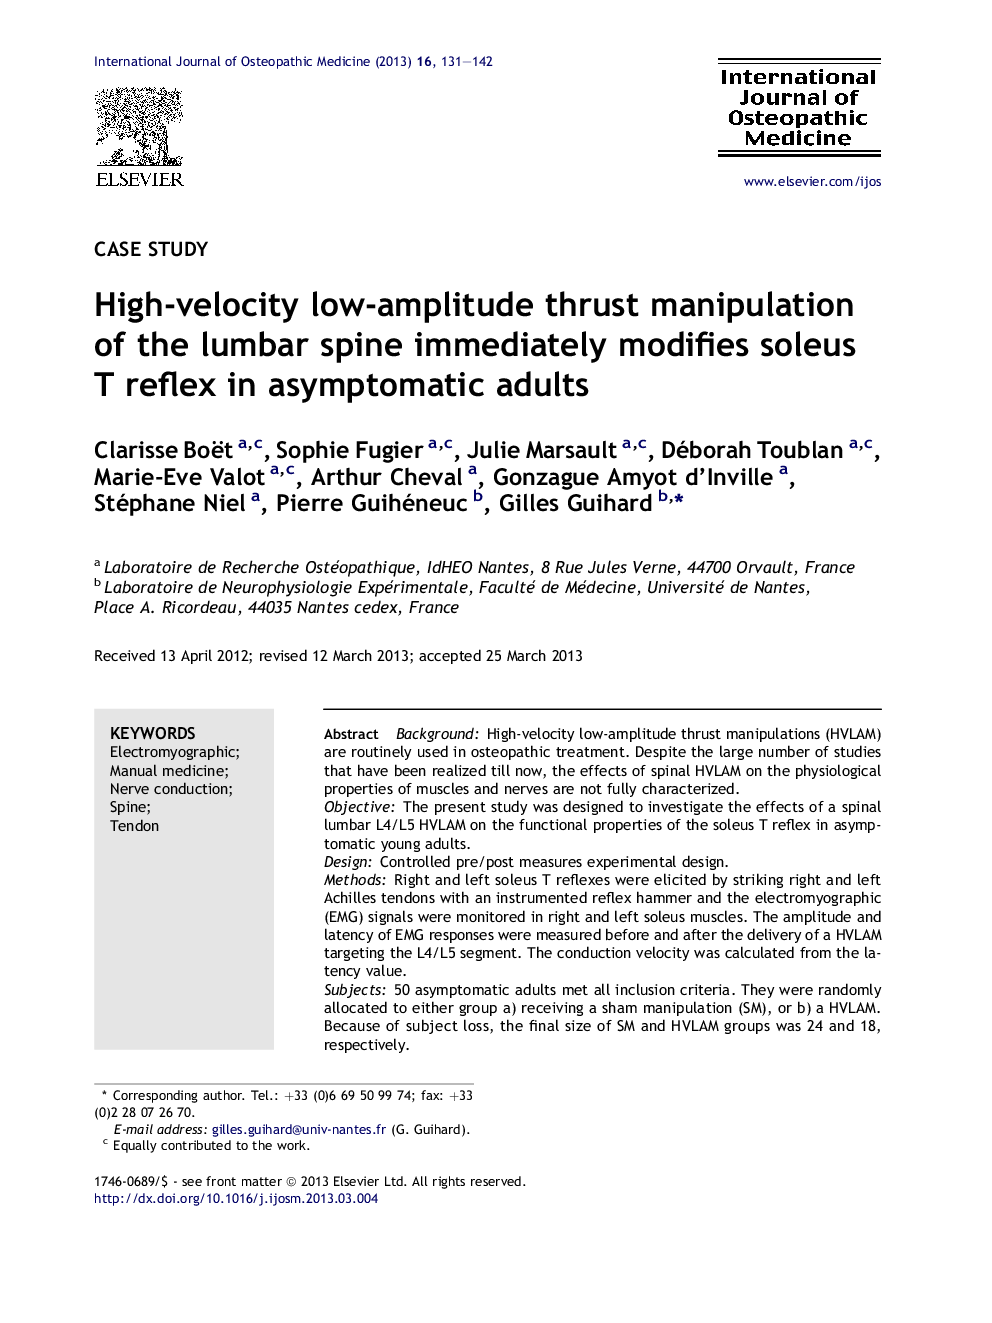 High-velocity low-amplitude thrust manipulation of the lumbar spine immediately modifies soleus T reflex in asymptomatic adults